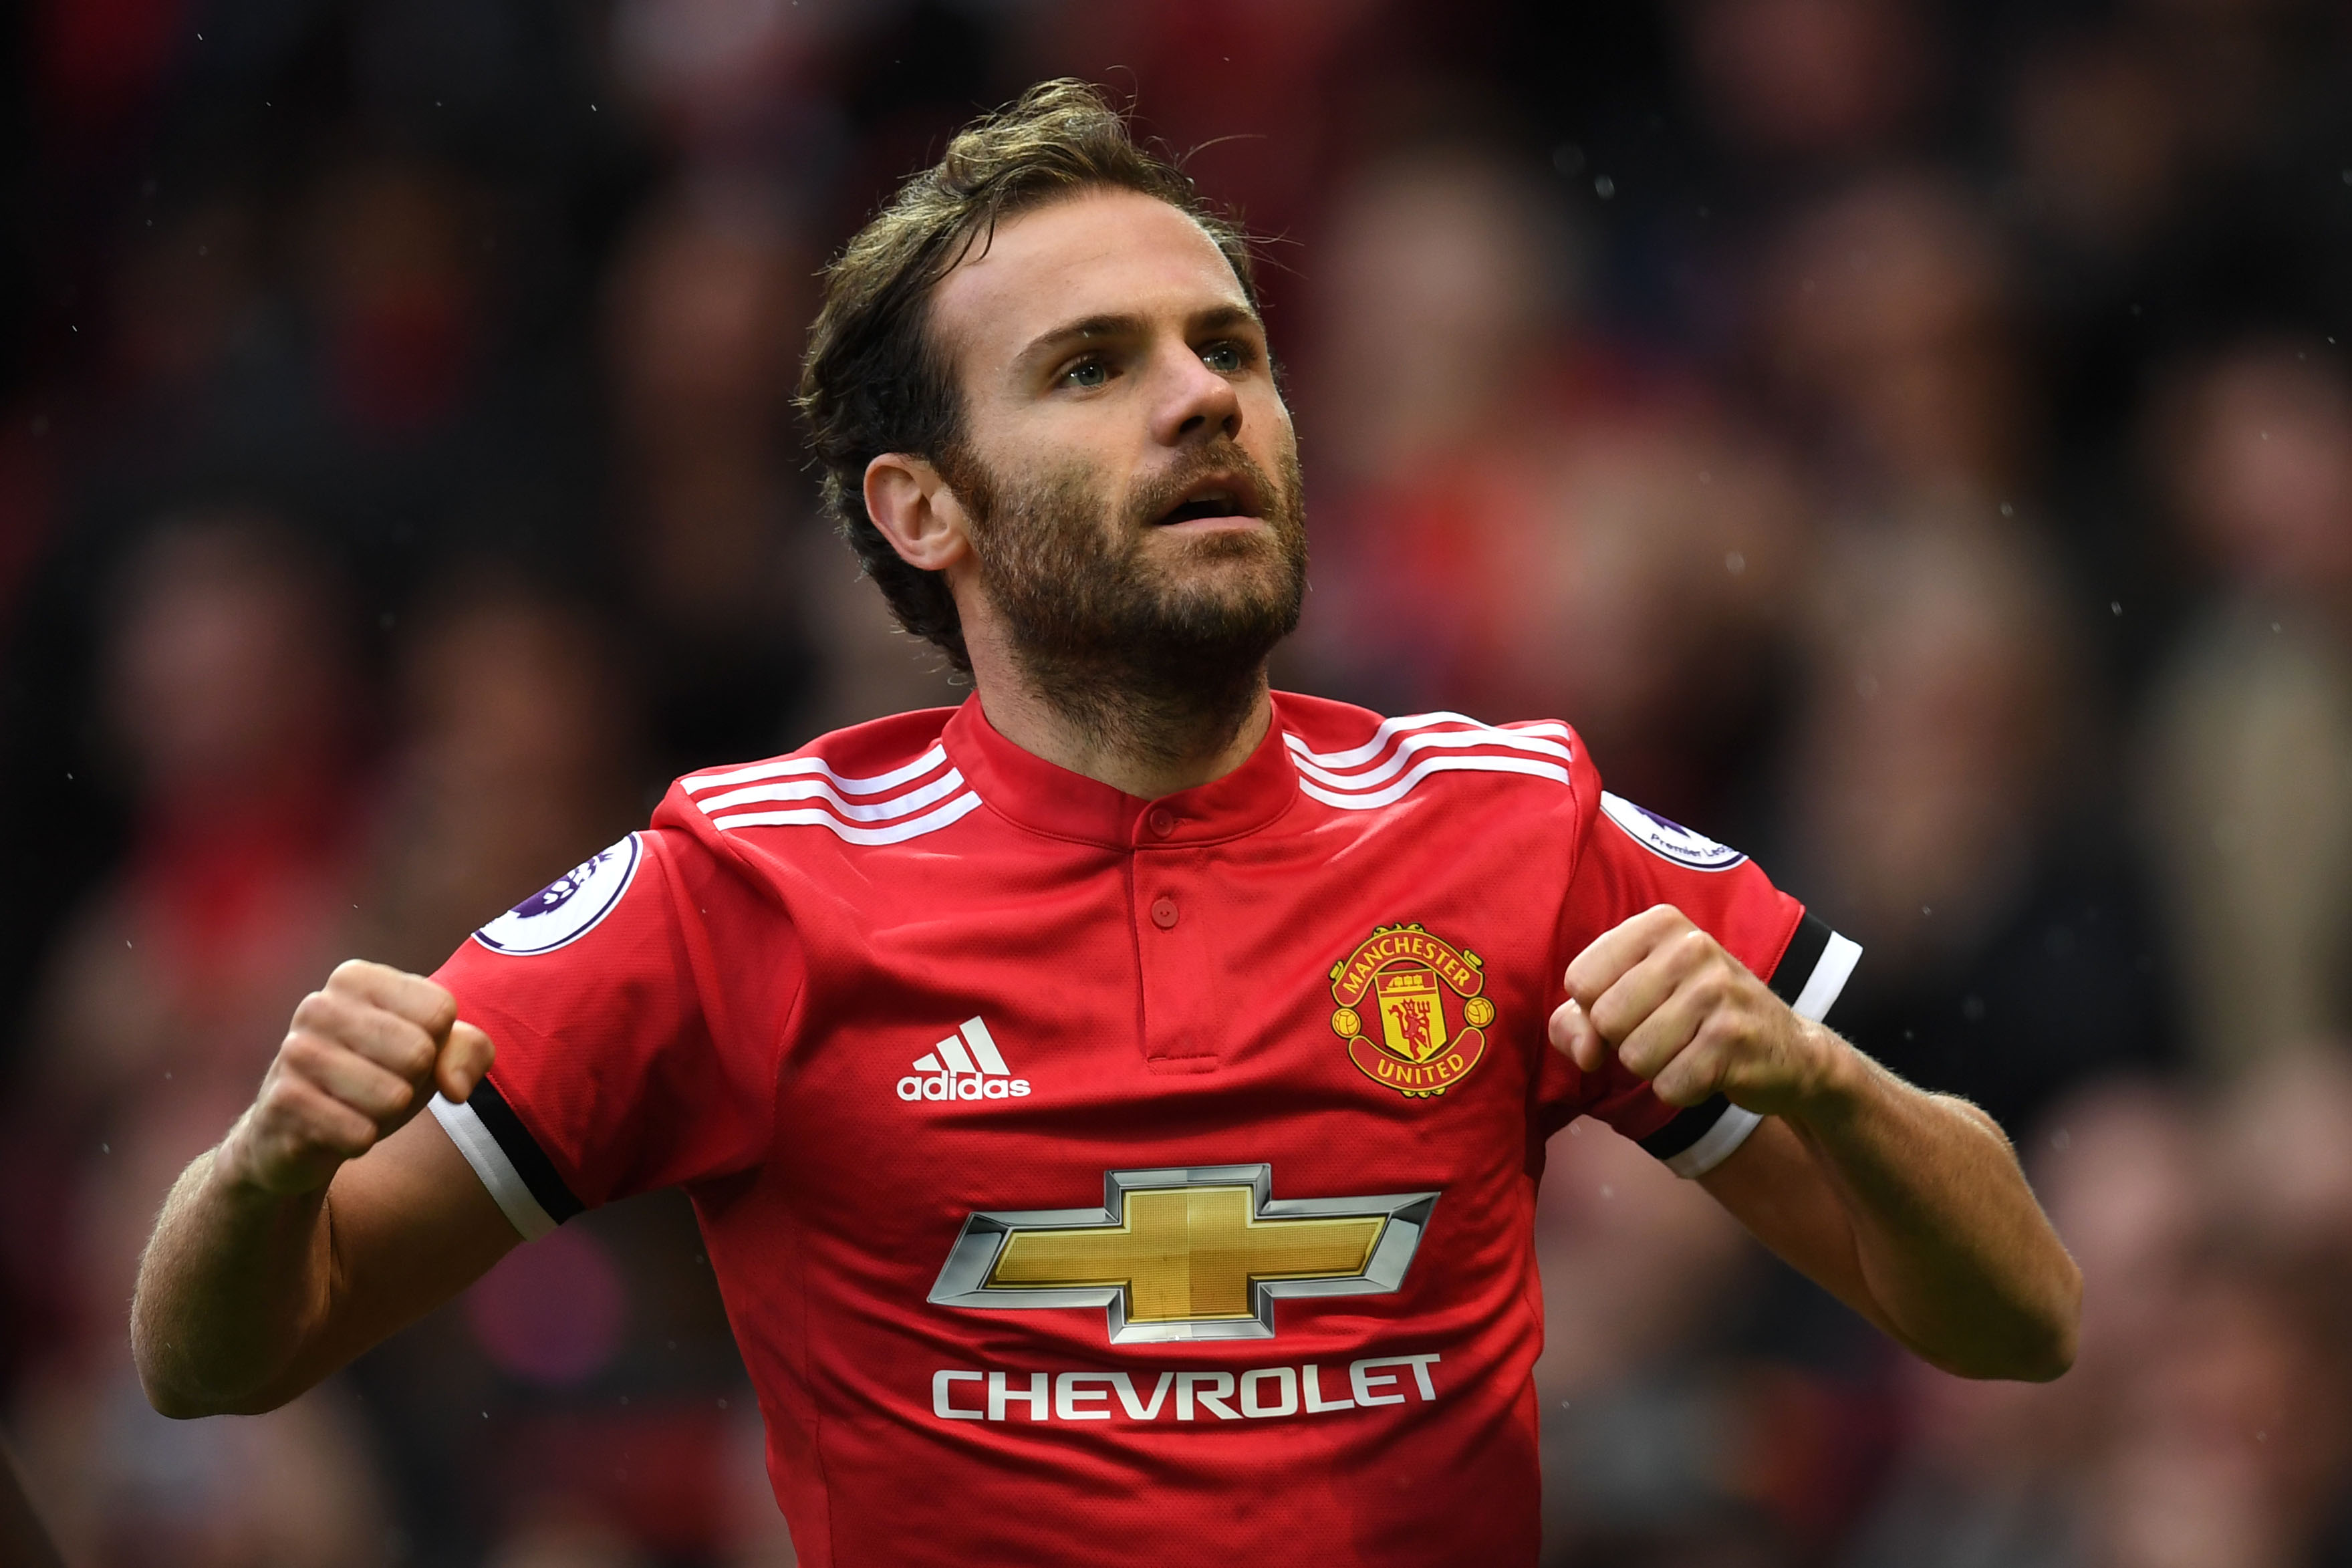 Manchester United's Spanish midfielder Juan Mata celebrates scoring the team's first goal during the English Premier League football match between Manchester United and Crystal Palace at Old Trafford in Manchester, north west England, on September 30, 2017. / AFP PHOTO / Paul ELLIS / RESTRICTED TO EDITORIAL USE. No use with unauthorized audio, video, data, fixture lists, club/league logos or 'live' services. Online in-match use limited to 75 images, no video emulation. No use in betting, games or single club/league/player publications.  /         (Photo credit should read PAUL ELLIS/AFP/Getty Images)